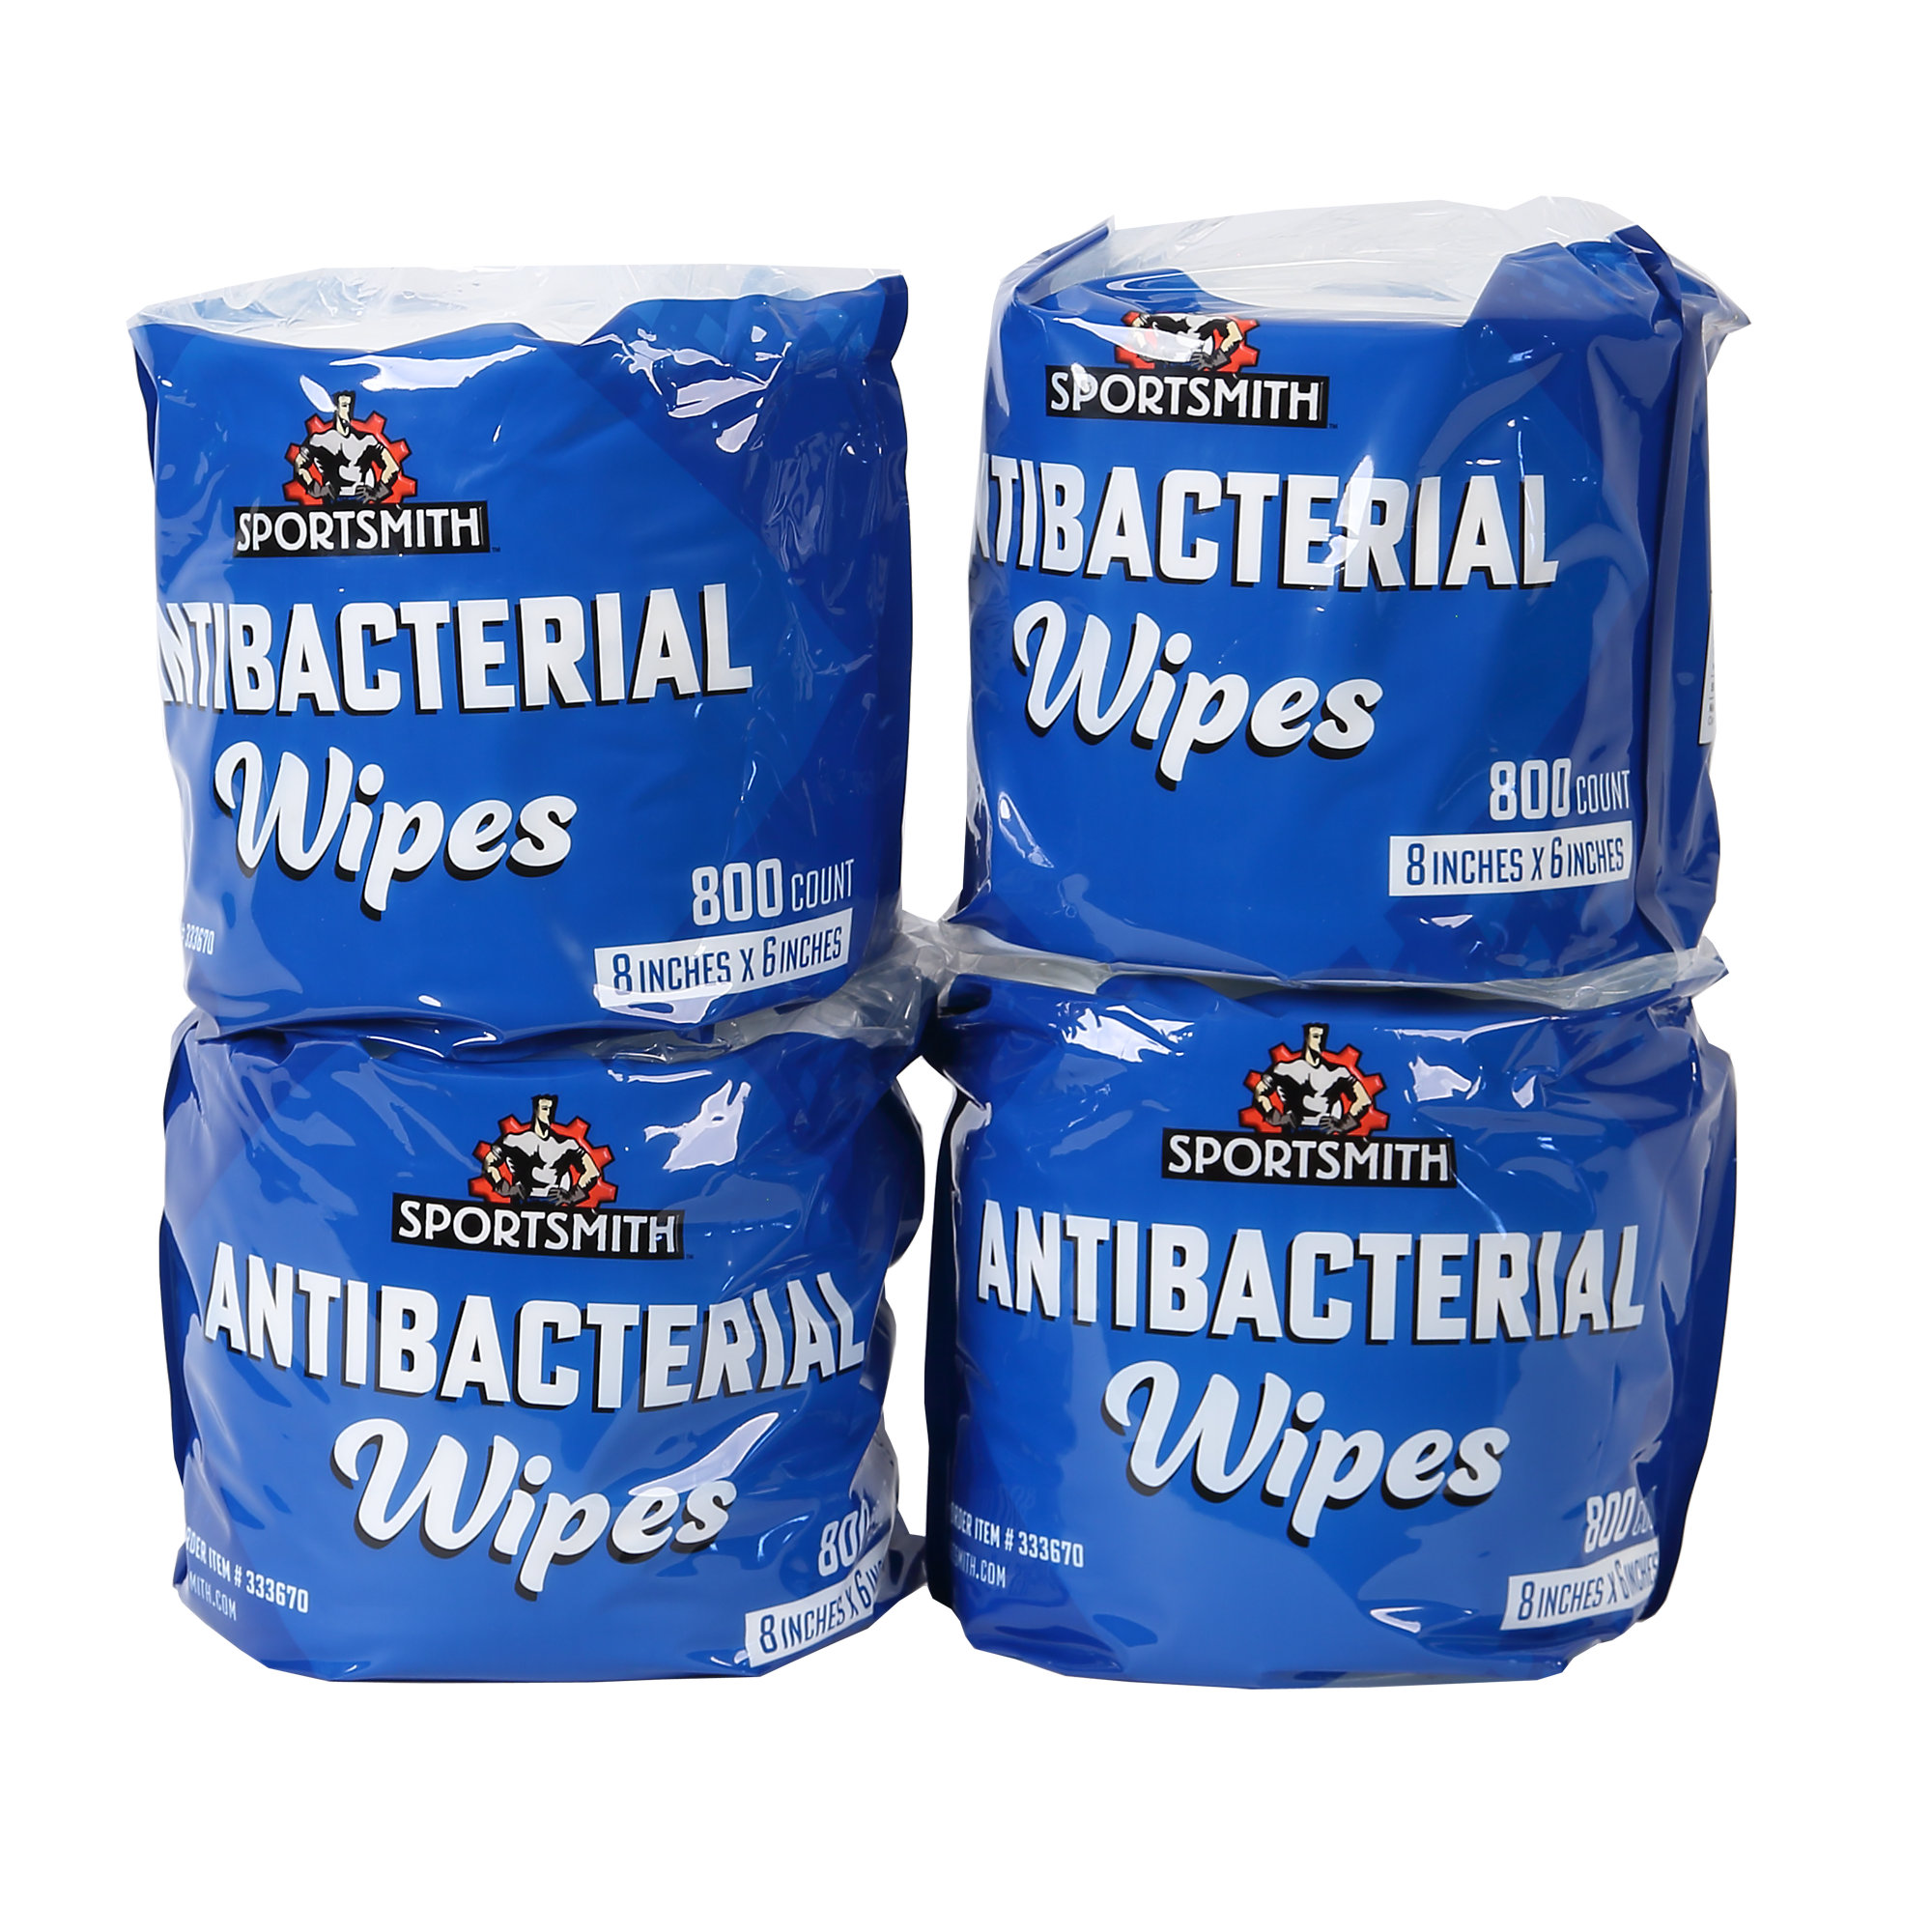 Fitness Equipment Antibacterial Wipes by Sportsmith, 6" x 8" Wipe, 800 wipes per roll, 4 rolls per case